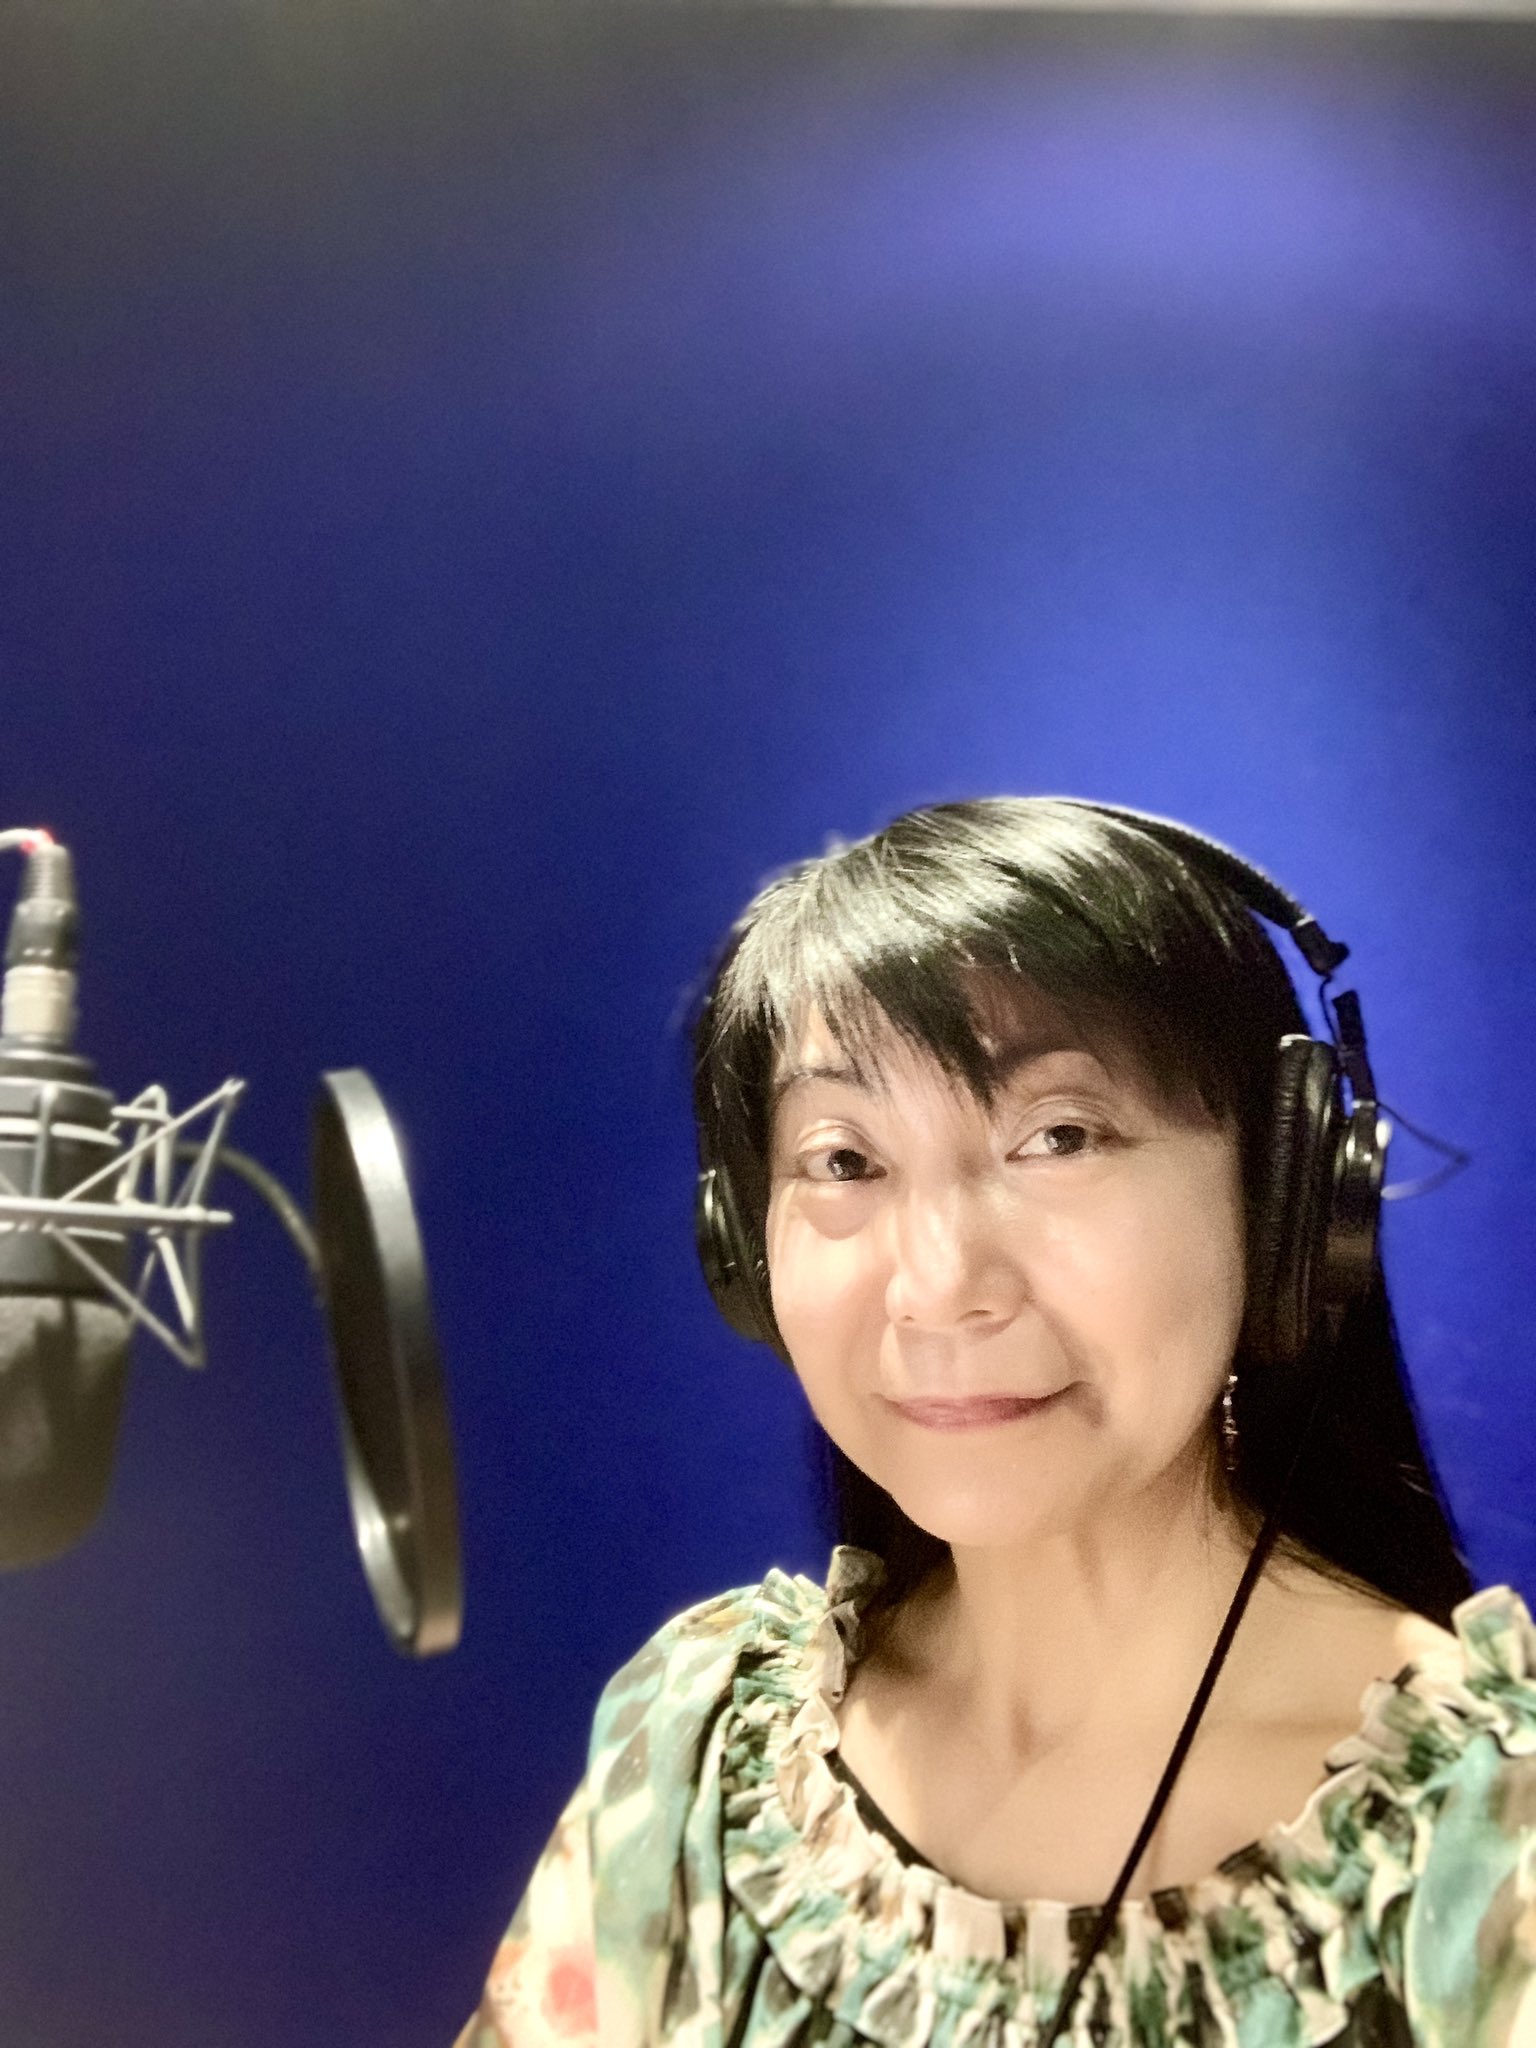 You Ri Yamanaka Today S Voiceover Thank You 今日の声優の仕事 感謝 Voiceover Voiceoverartist Voiceovertalent Voiceoveractor Voiceoverlife Japanesevoiceover Japanesevoiceactor Actorlife Actorlifestyle Actorslife London Uk